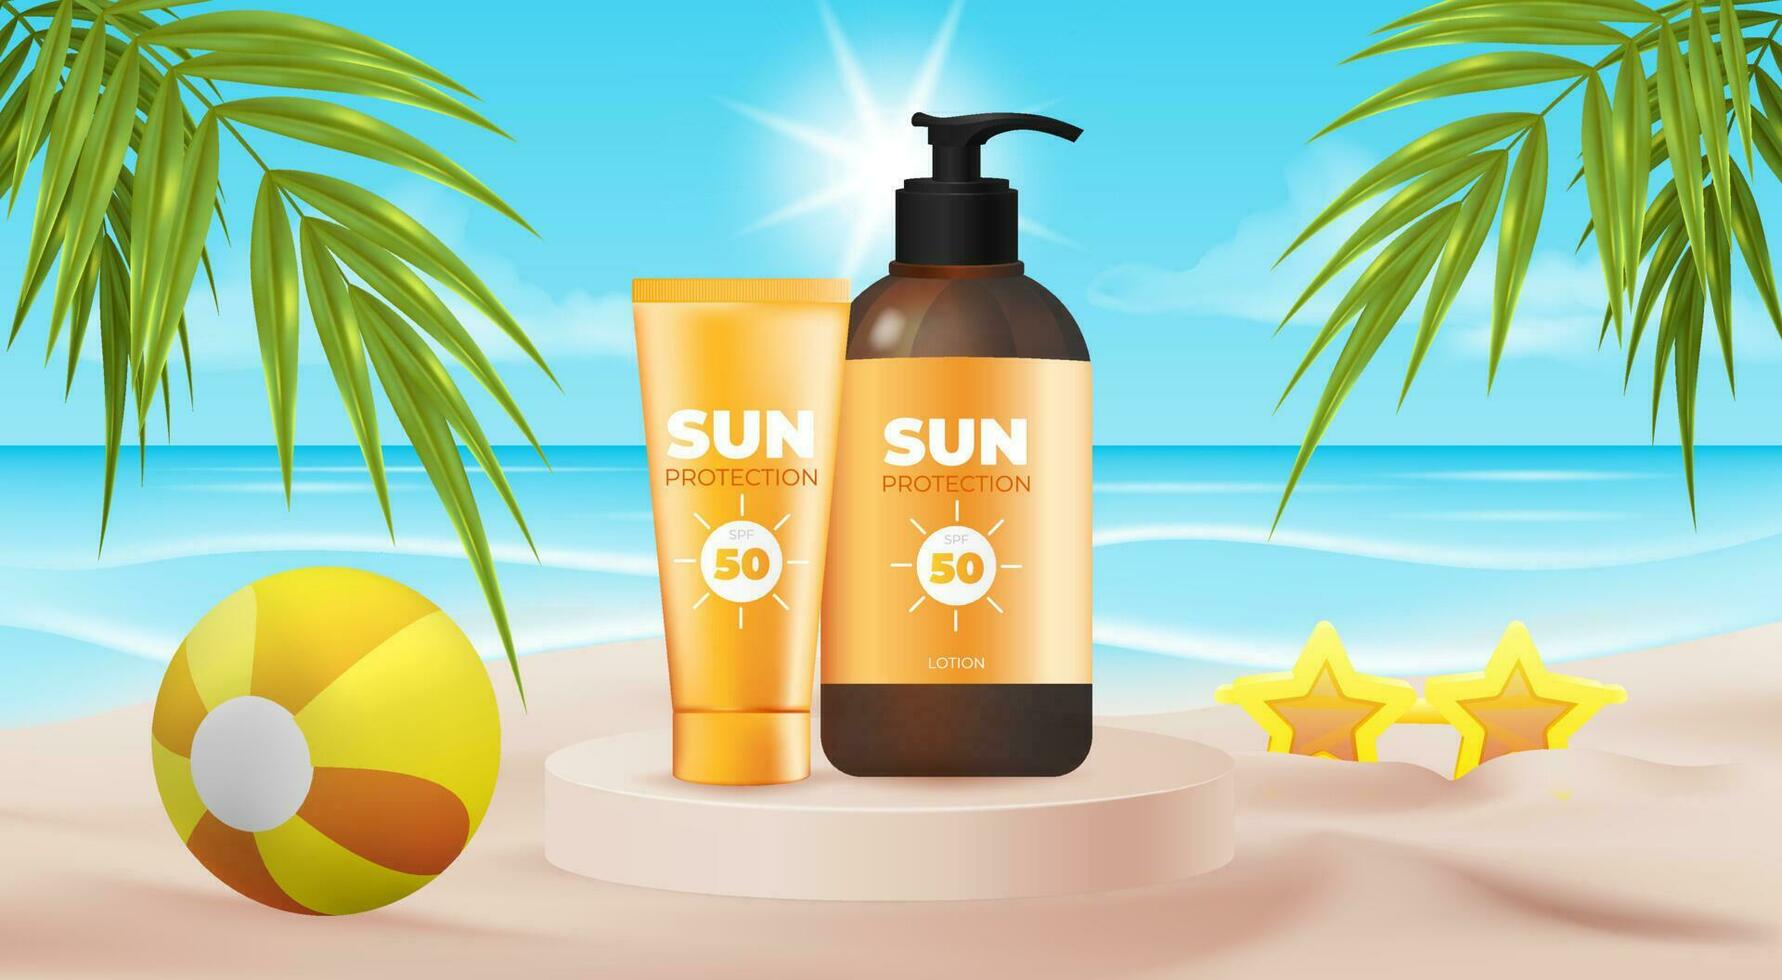 Vector illustration of a 3D sunscreen bottle on the beach. Realistic image with tropical concept, perfect for advertising health and beauty products. Template for sale display, with orange ball